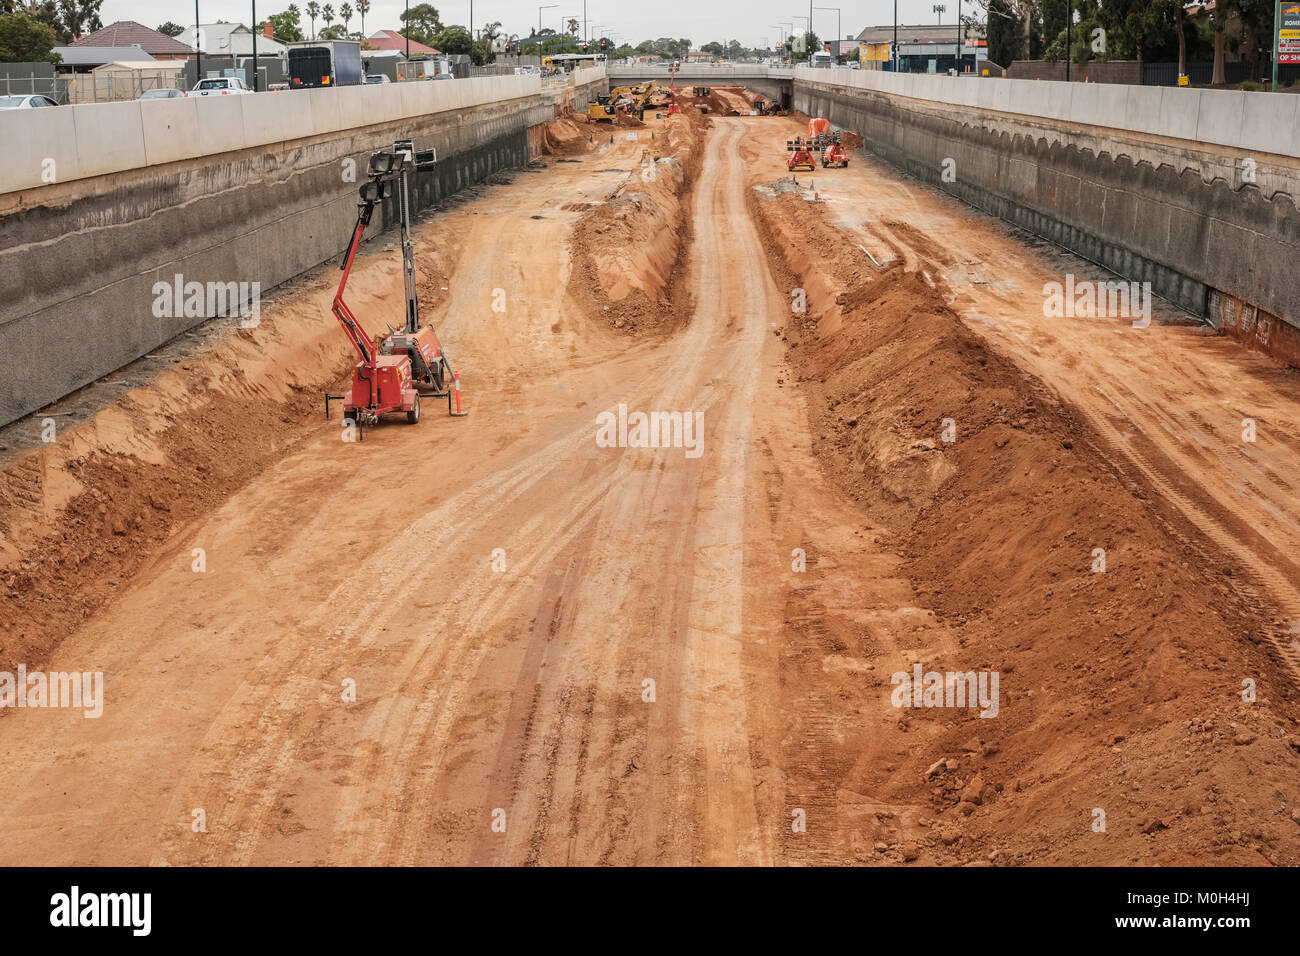 Adelaide, Australia - January 10, 2018: Torrens Road to River Torrens Project under construction view along South Rd on a day. New six-lane 4km roadwa Stock Photo